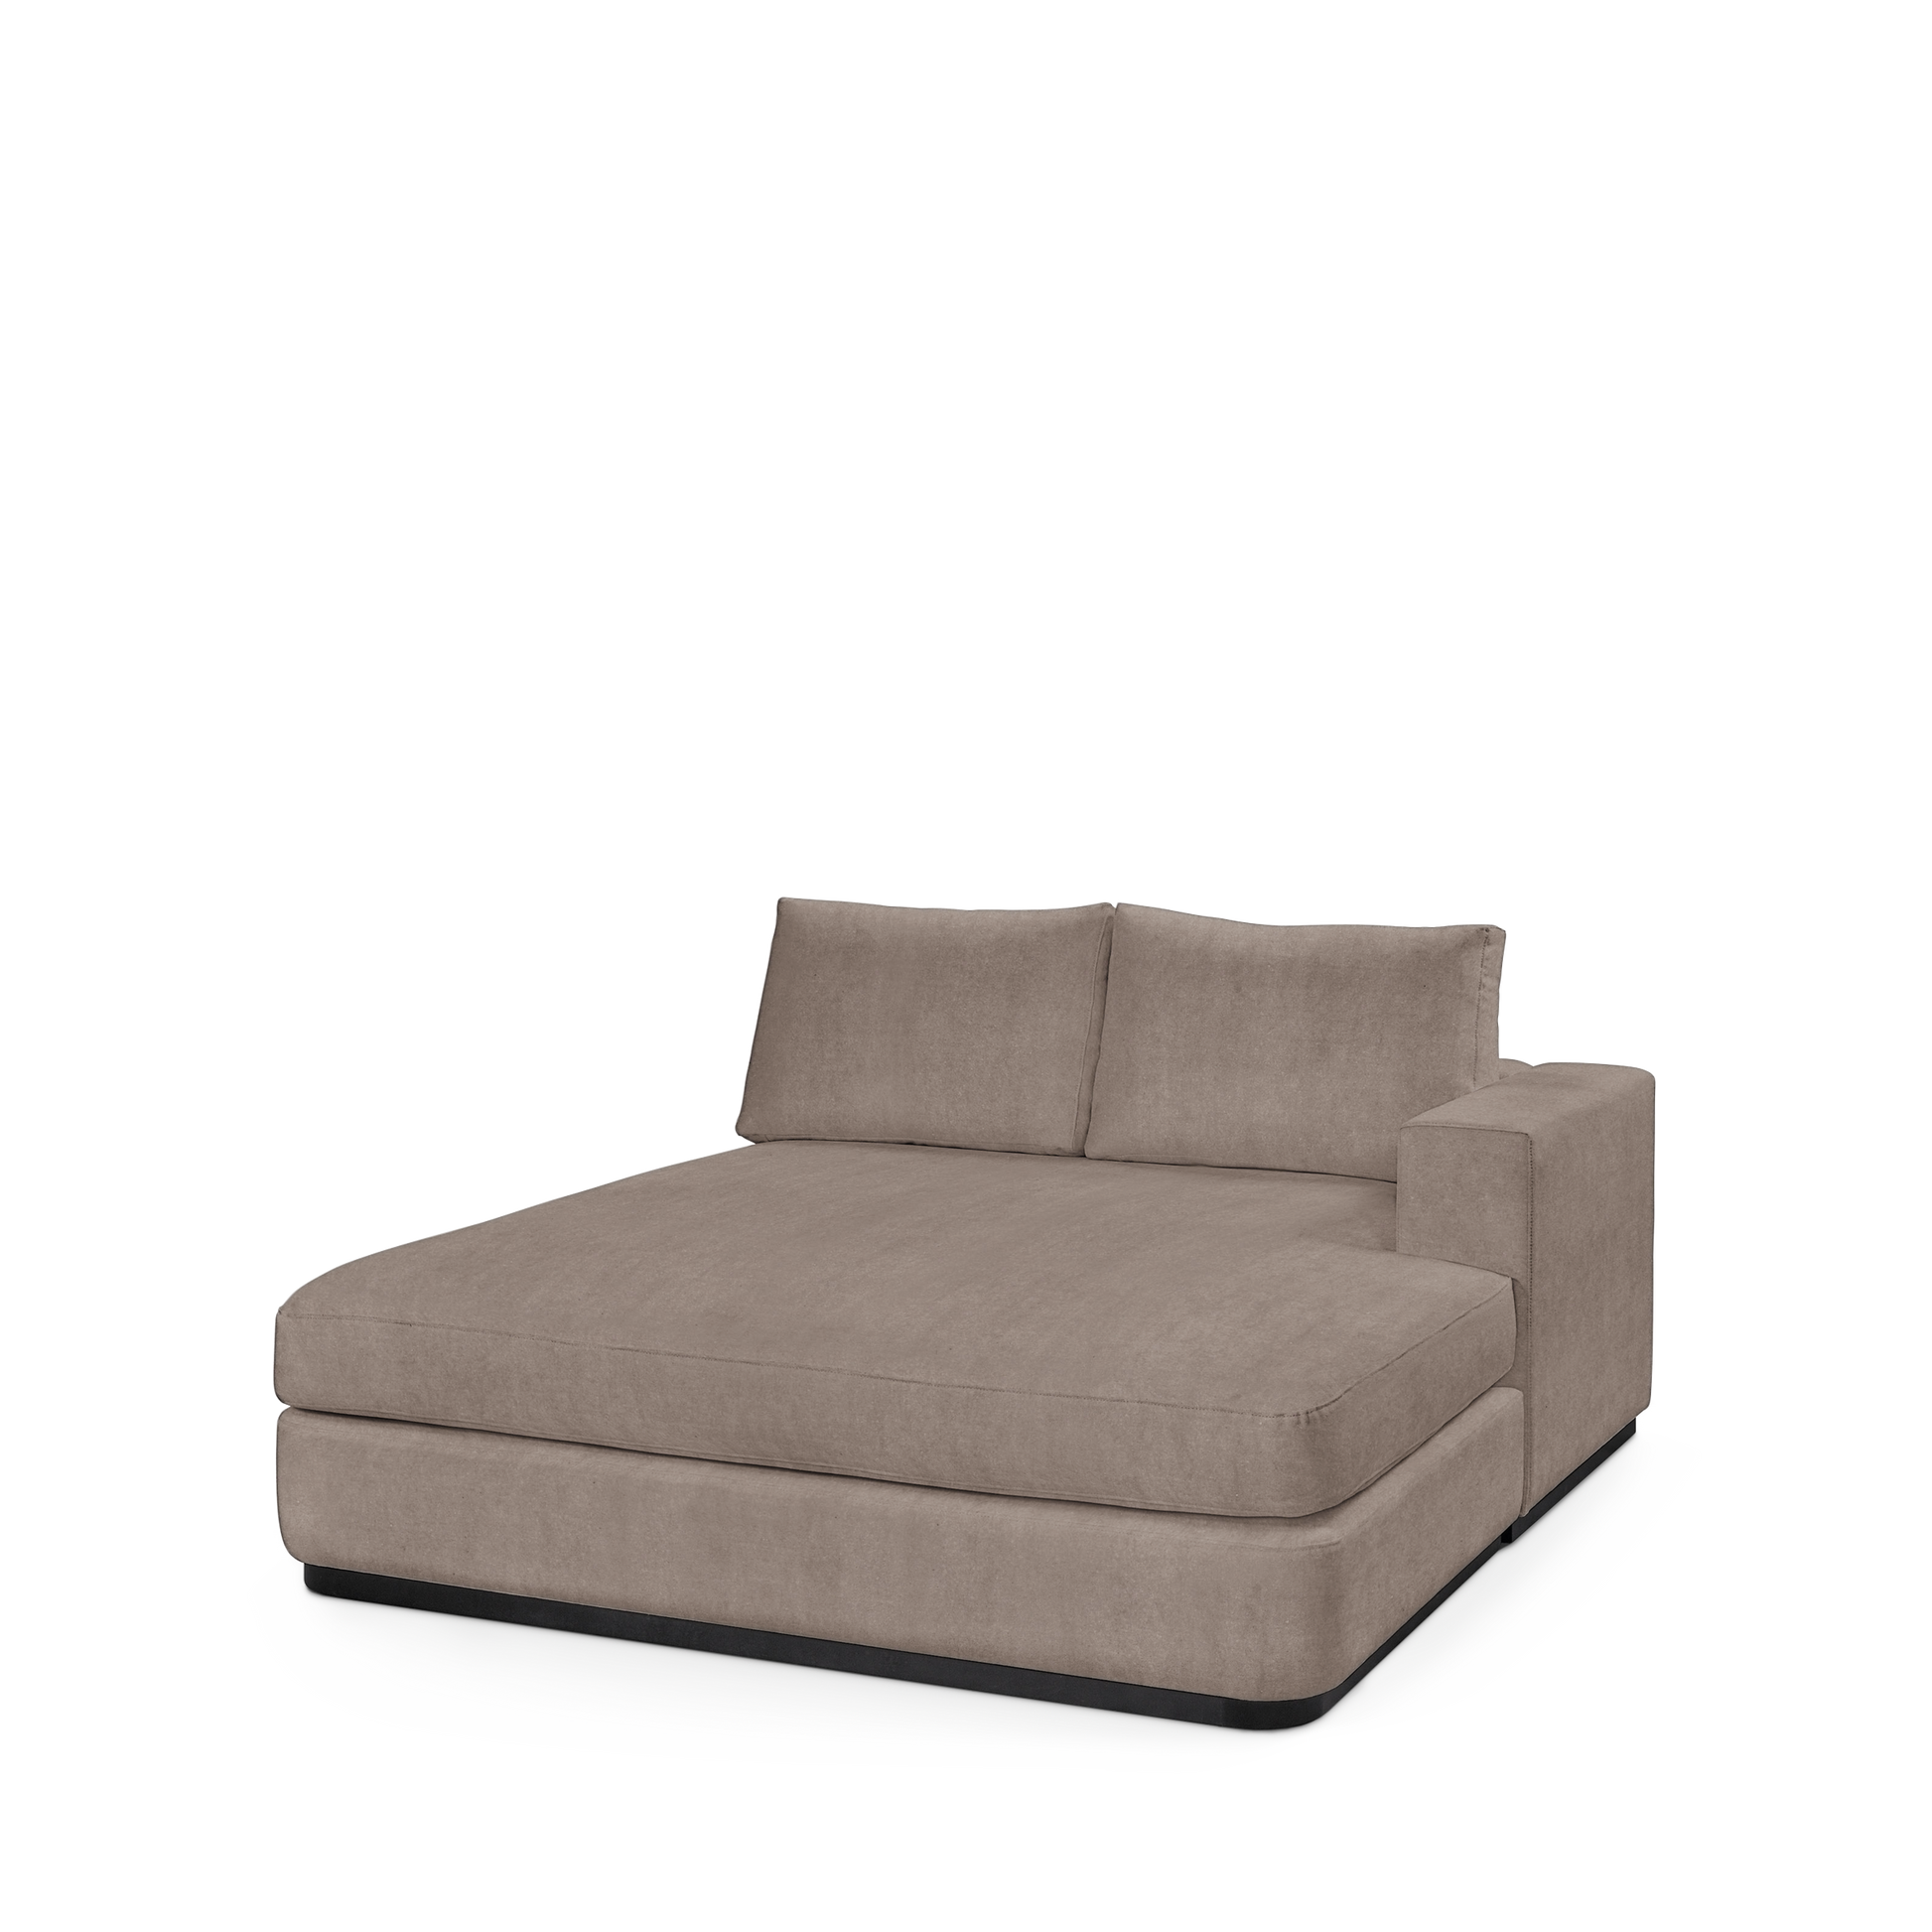 ATLAS 160 Lounge Bed arm rest right with London grey textile